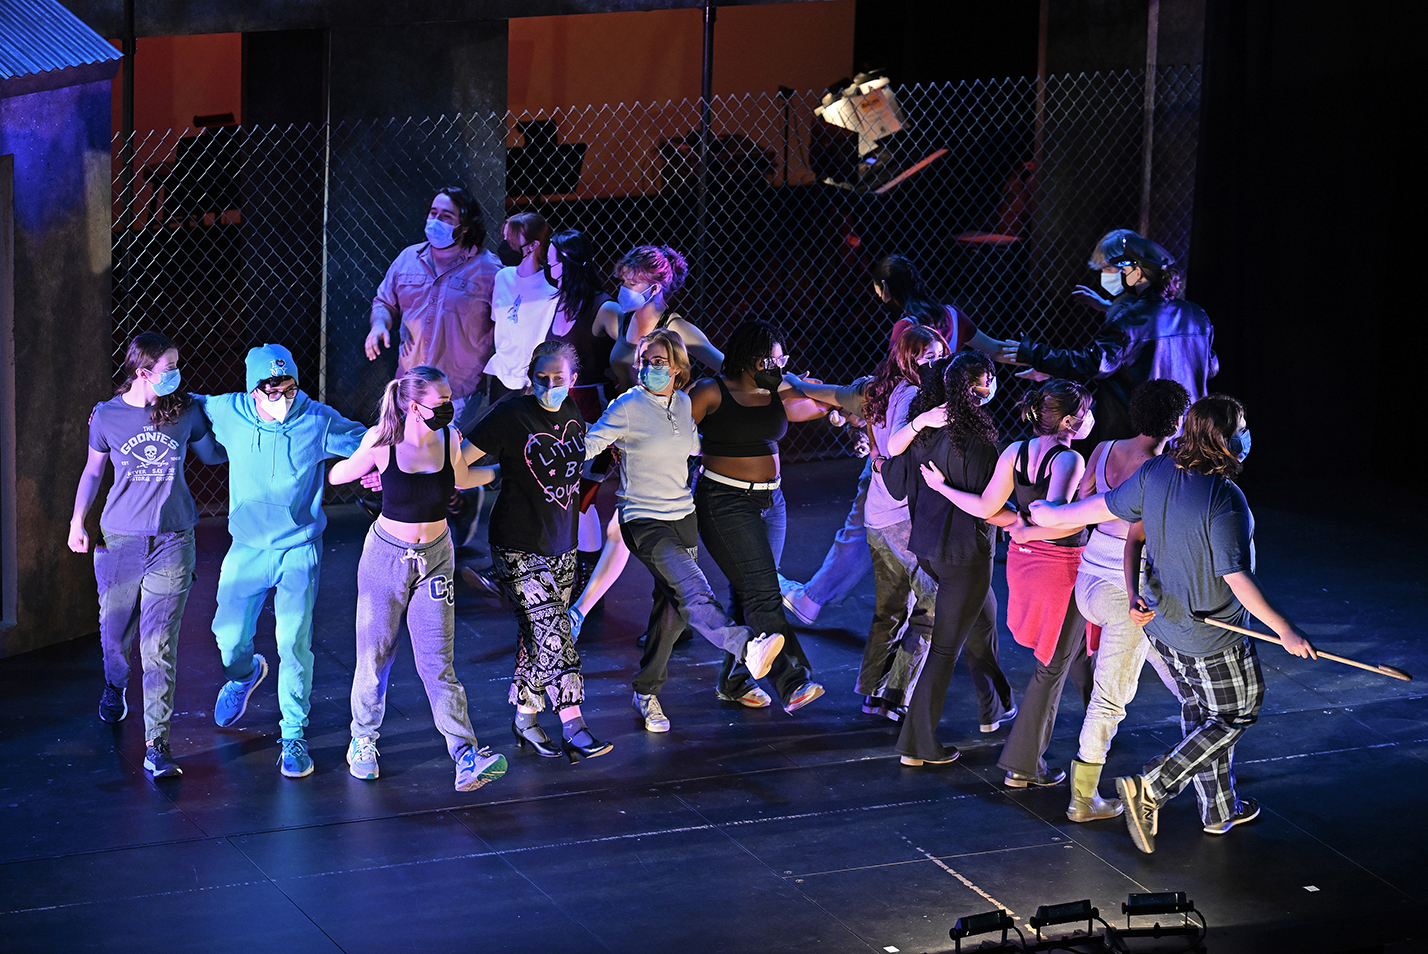 actors dance around on stage in big x formation